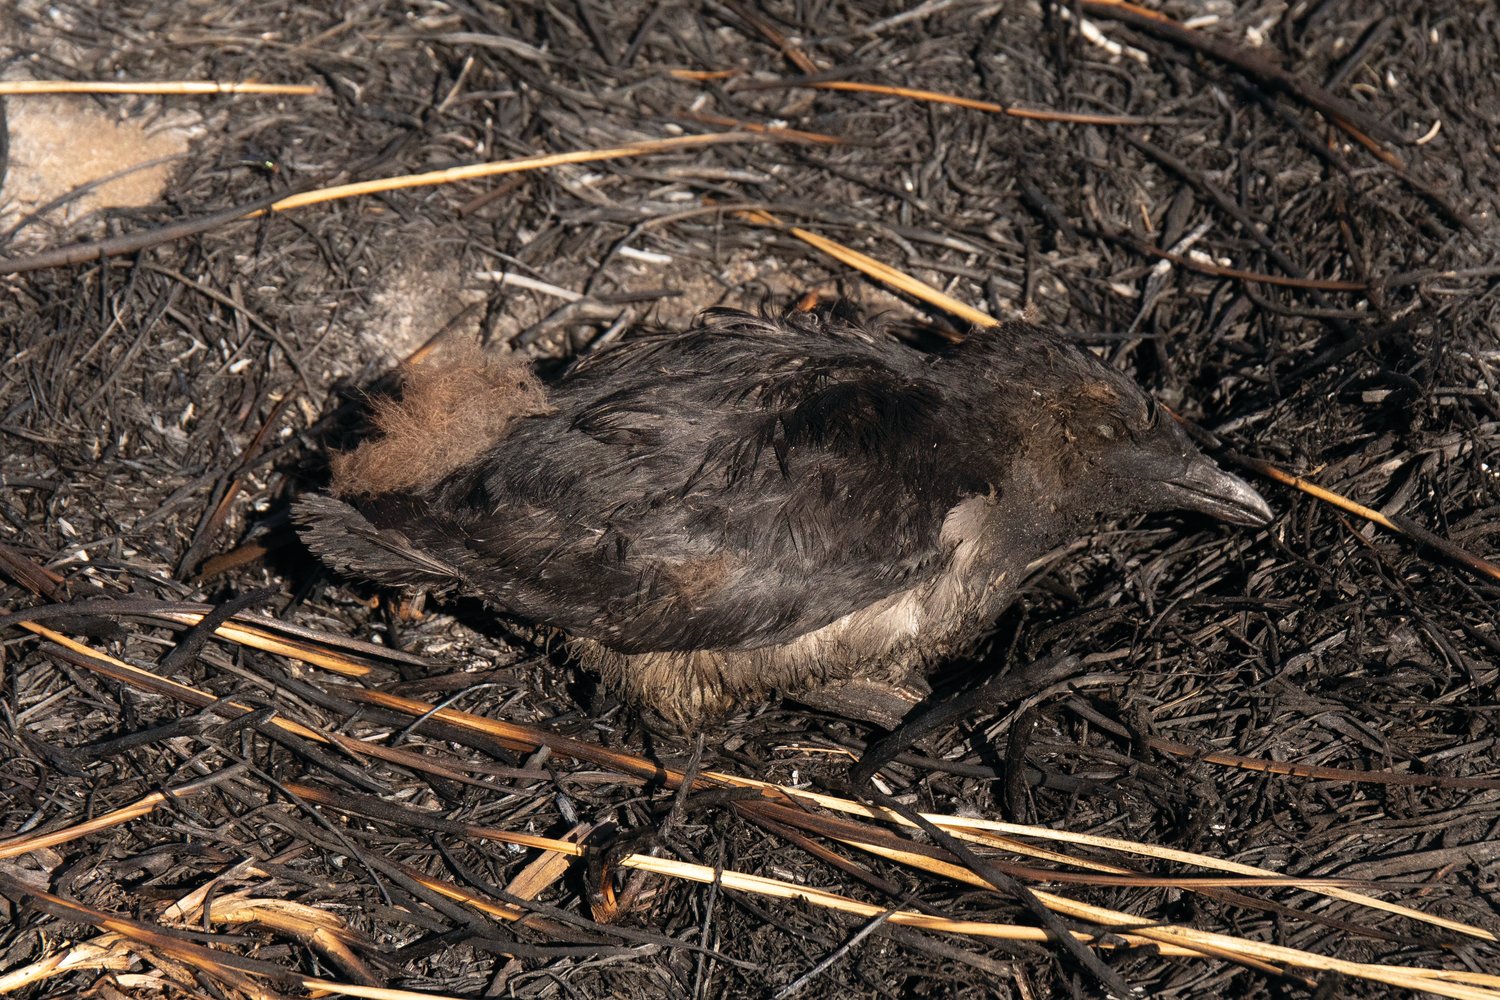 This rhinoceros auklet chick was one of many casualties caused by an Aug. 3 fire on Protection Island. Dry, combustible grasses contributed to the spread of the blaze, the cause of which is currently undergoing investigation.